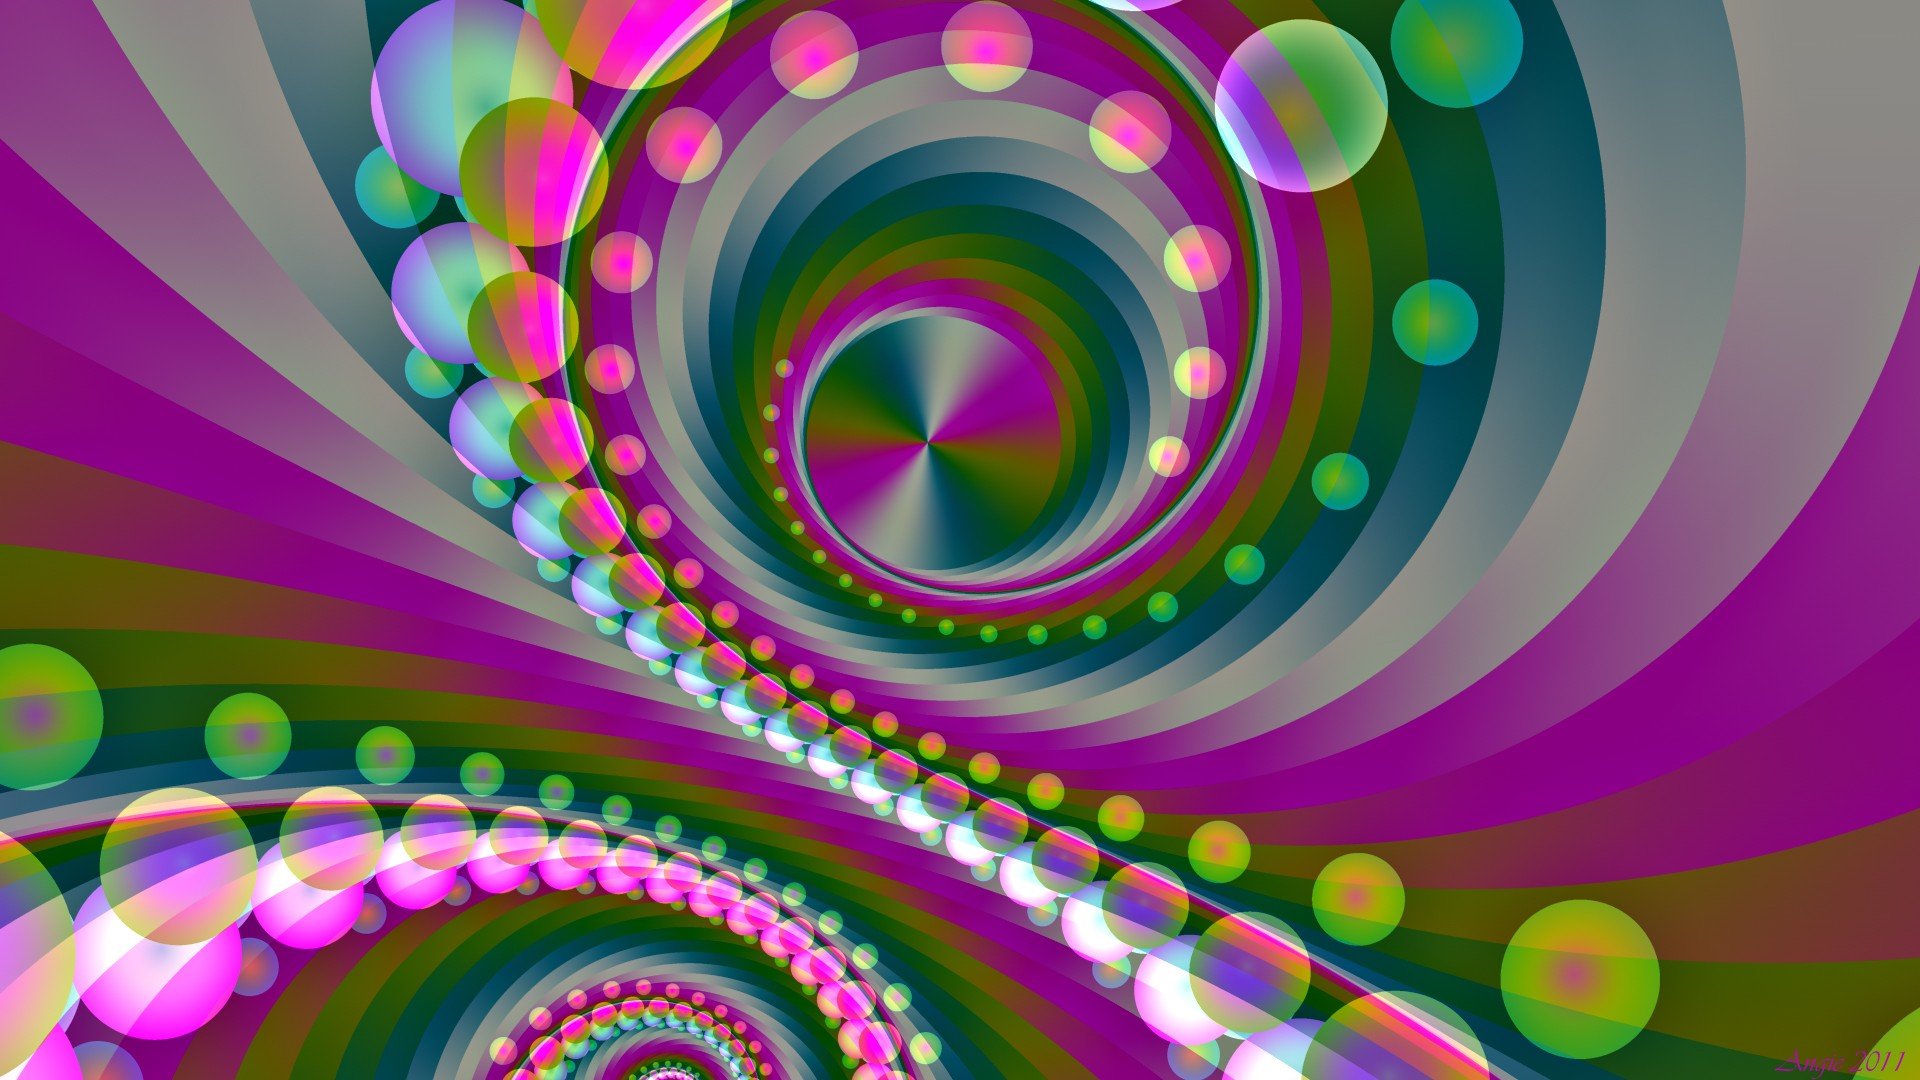 abstract, Multicolor, Patterns, Psychedelic, Digital, Art, Backgrounds, Colors Wallpaper